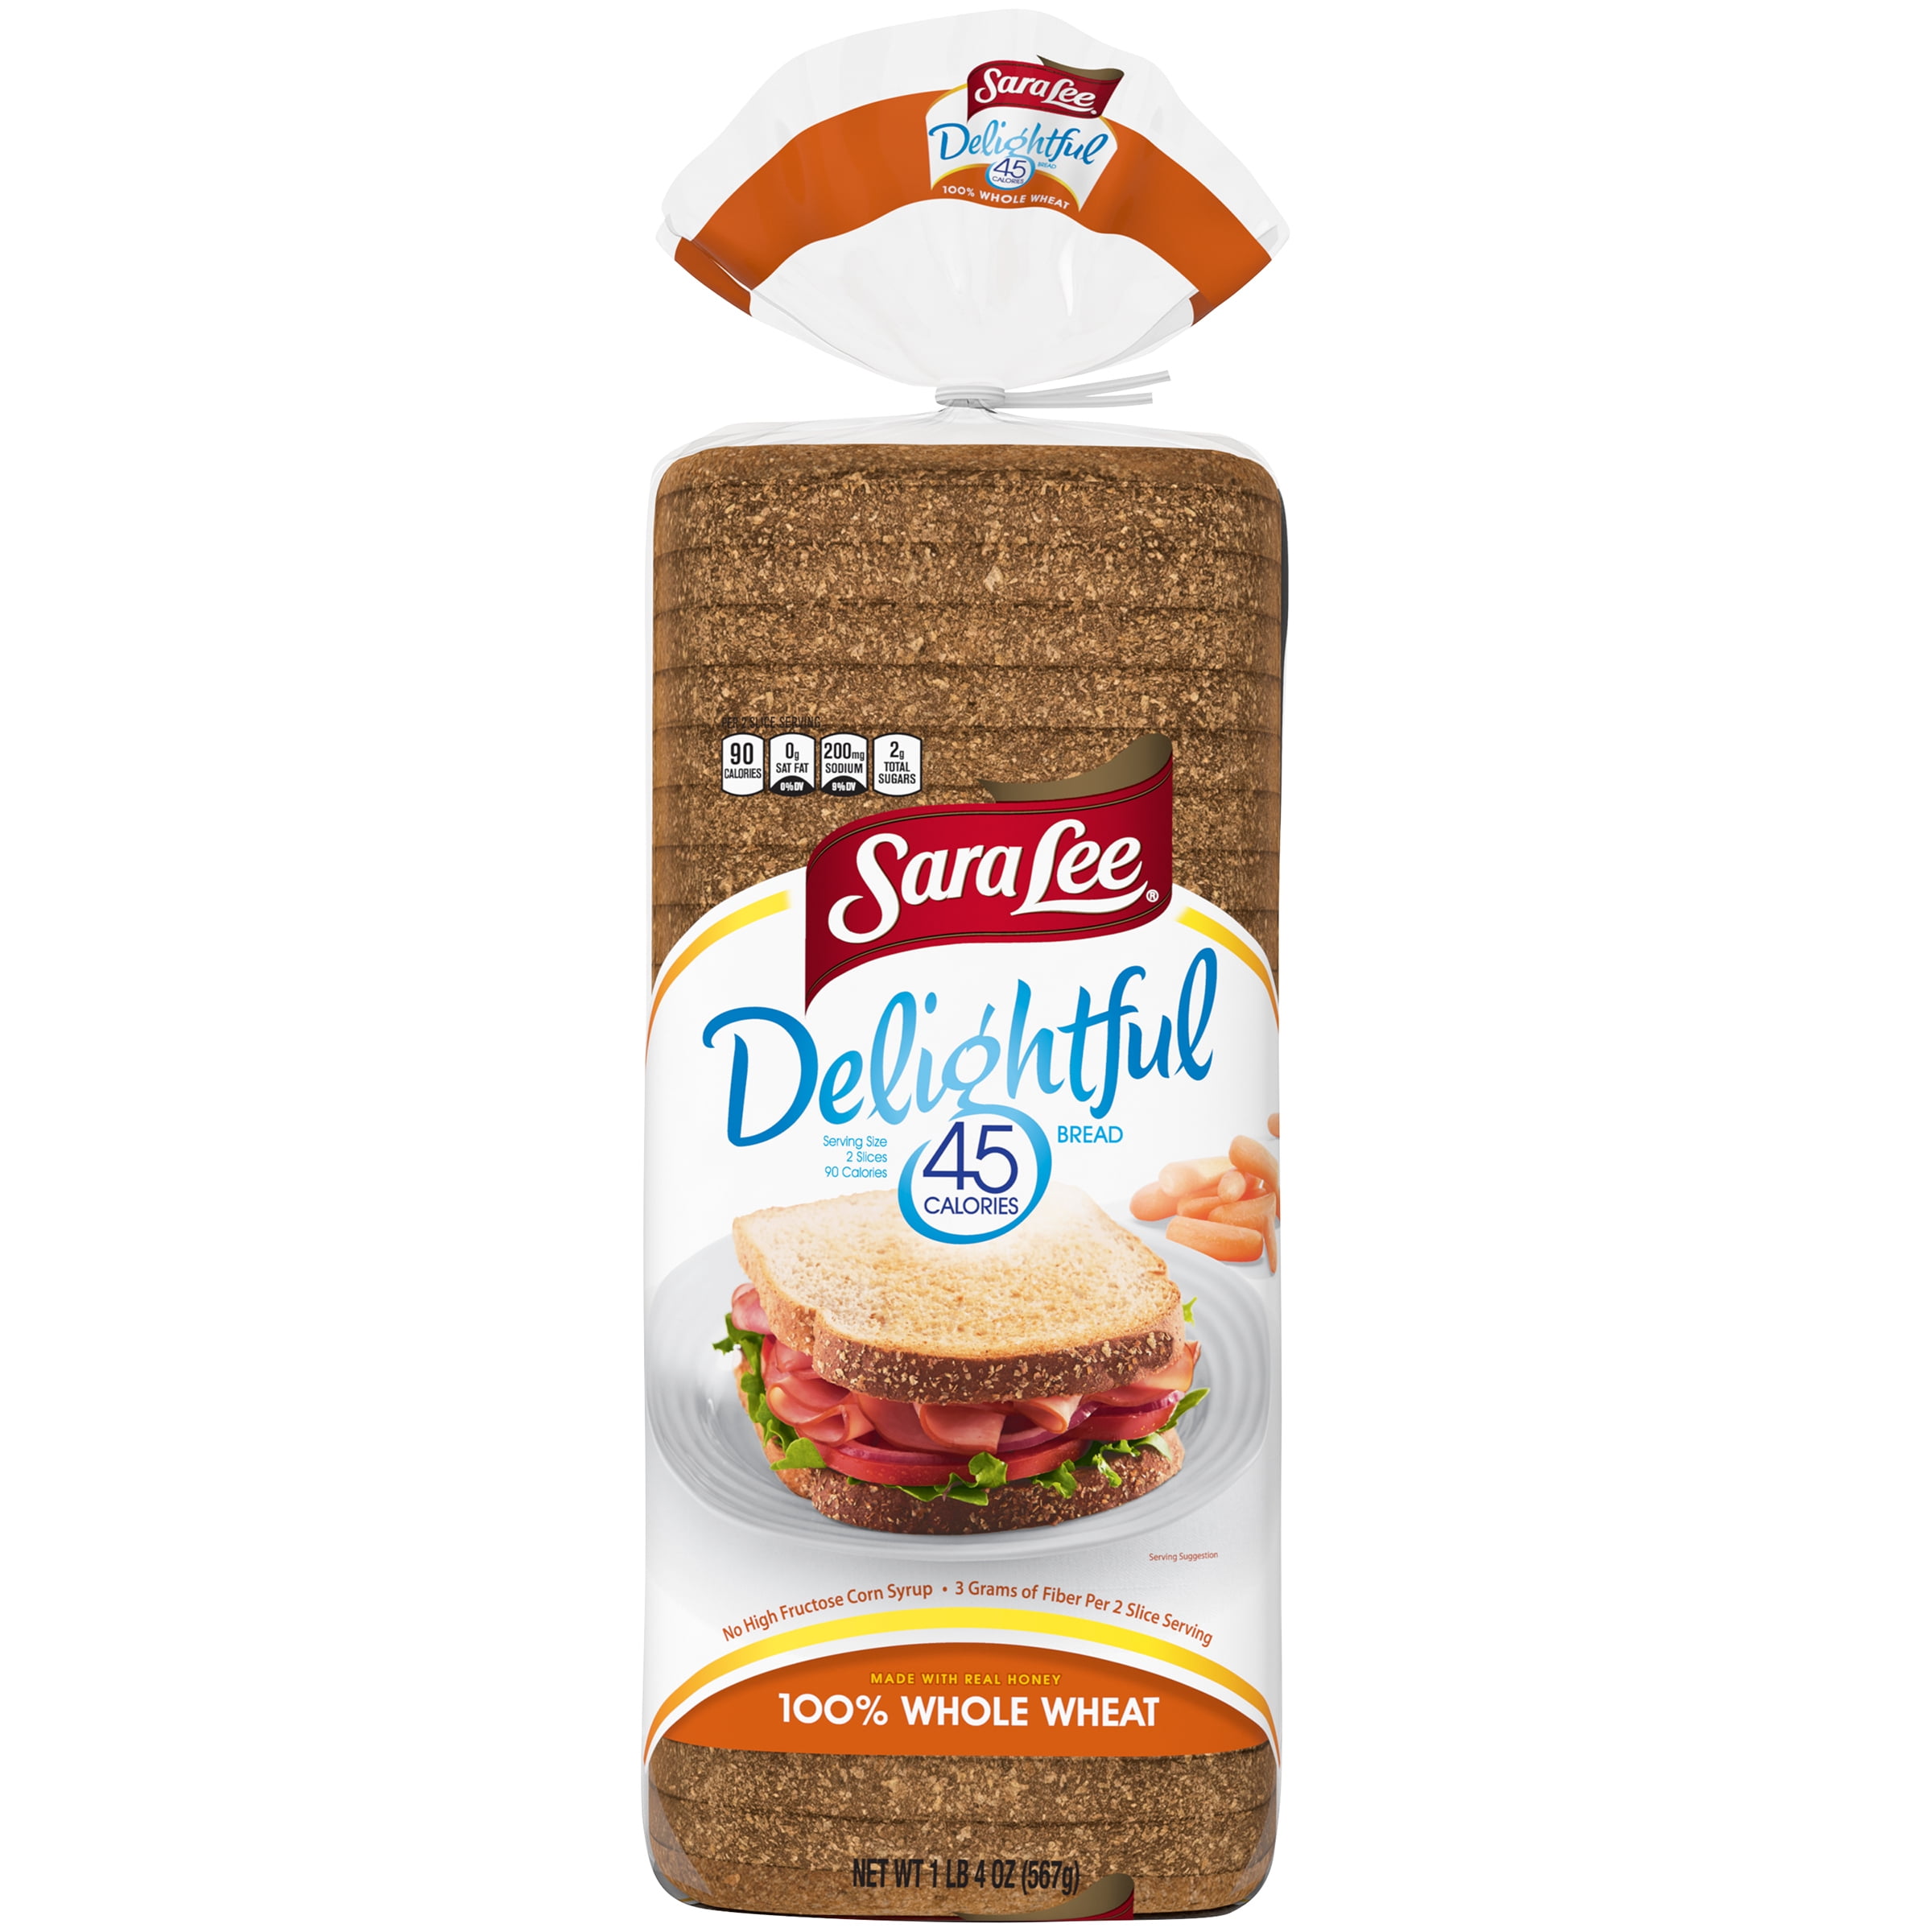 Sara Lee Delightful Whole Wheat Bread Nutrition Facts ...